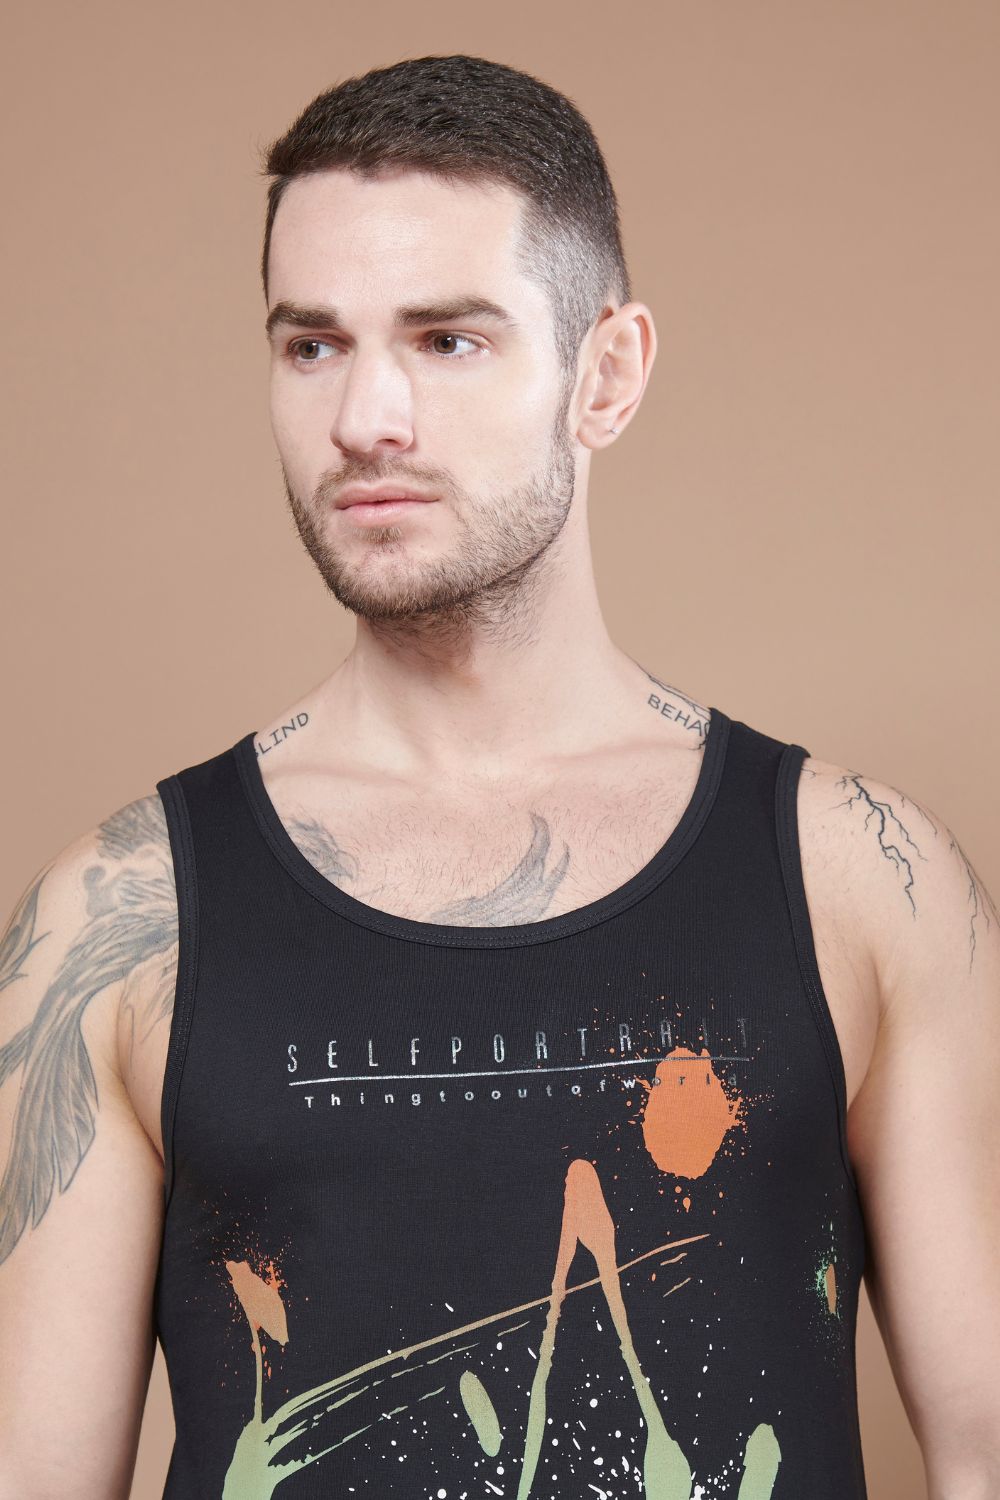 Black colored cotton Sleeveless Printed Tank Tees for men, close up.